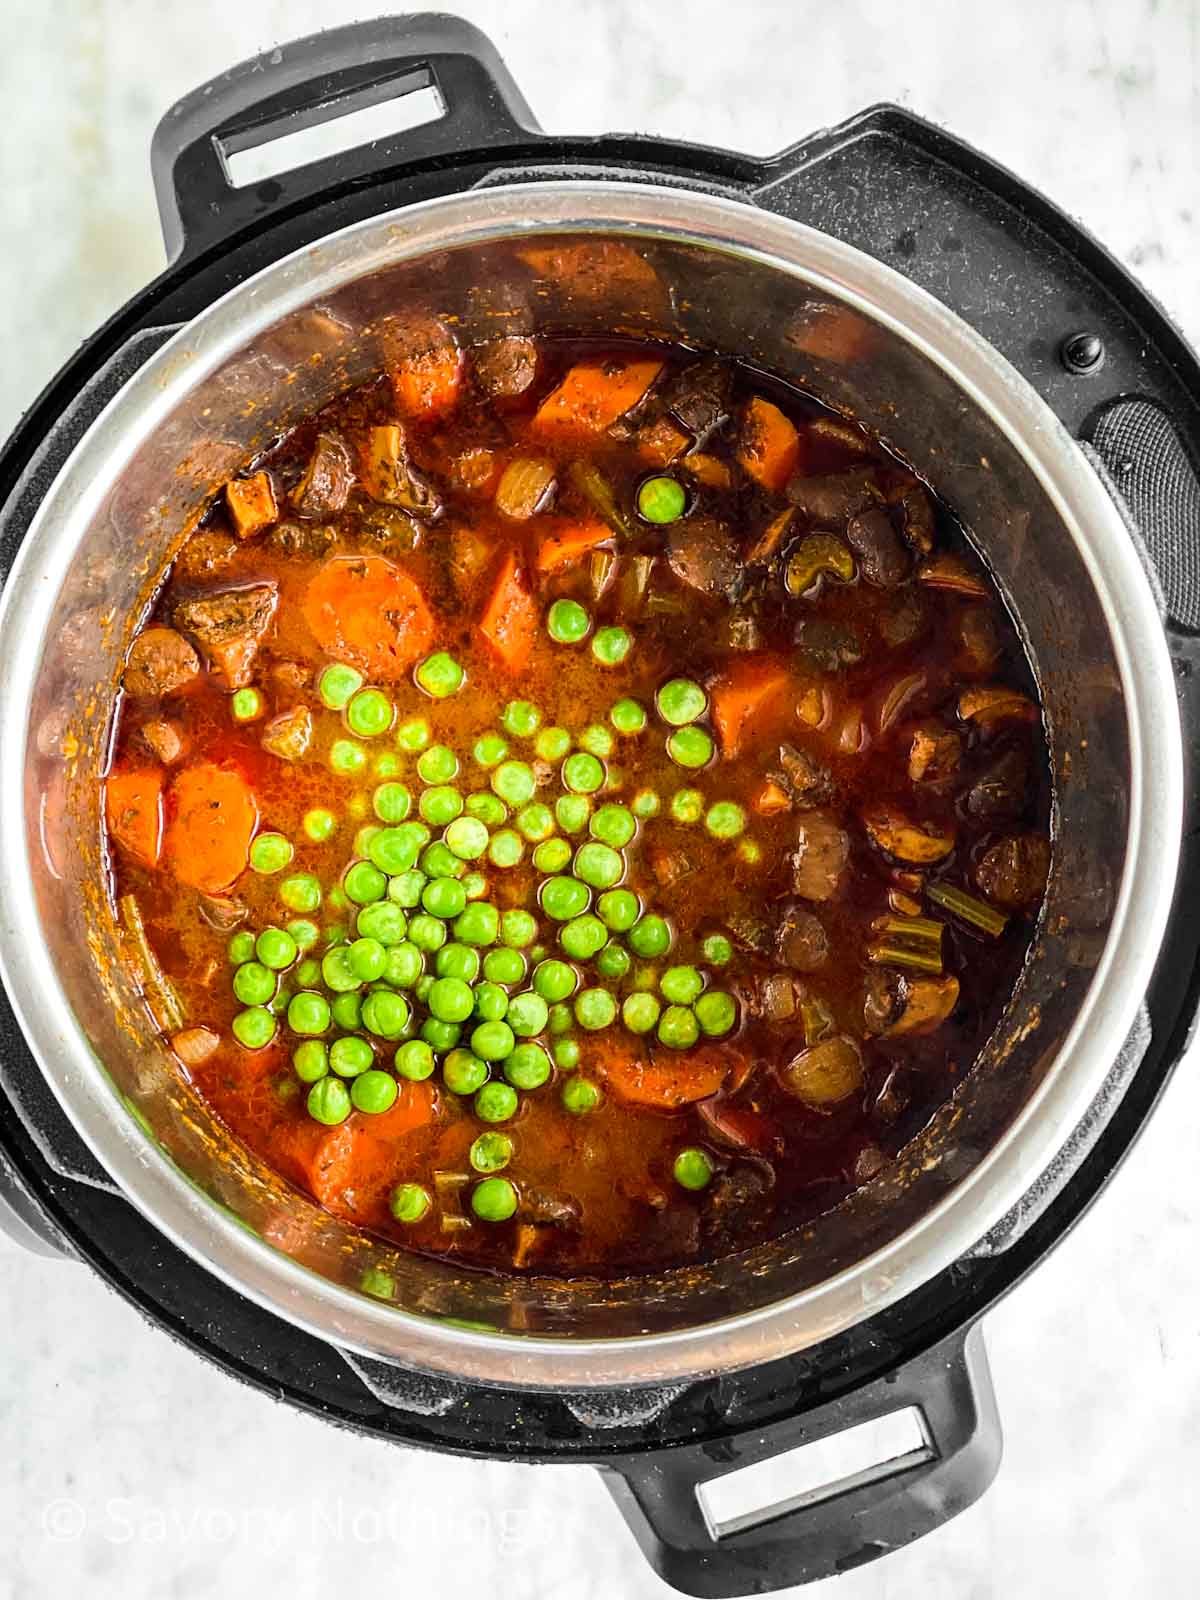 https://www.savorynothings.com/wp-content/uploads/2021/11/instant-pot-beef-stew-image-09.jpg